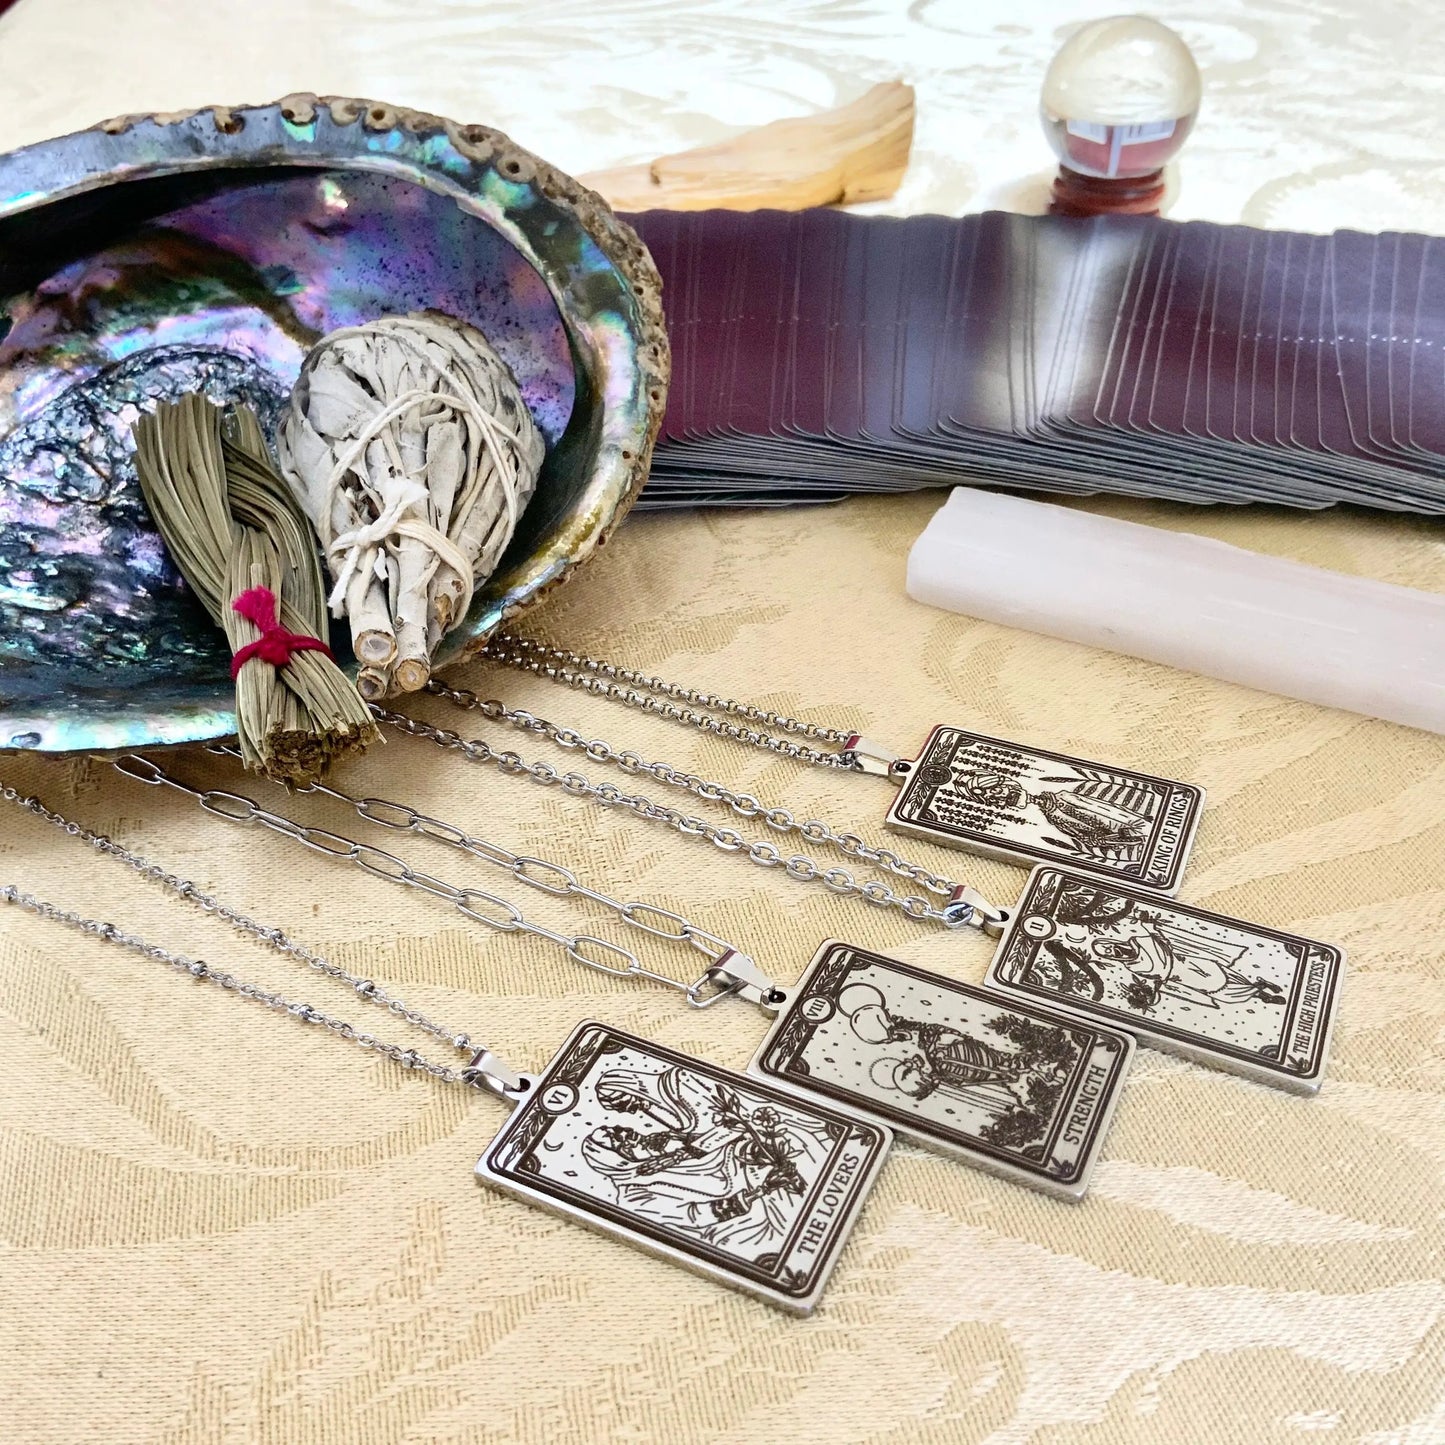 Kings of Rings Tarot Card Necklace